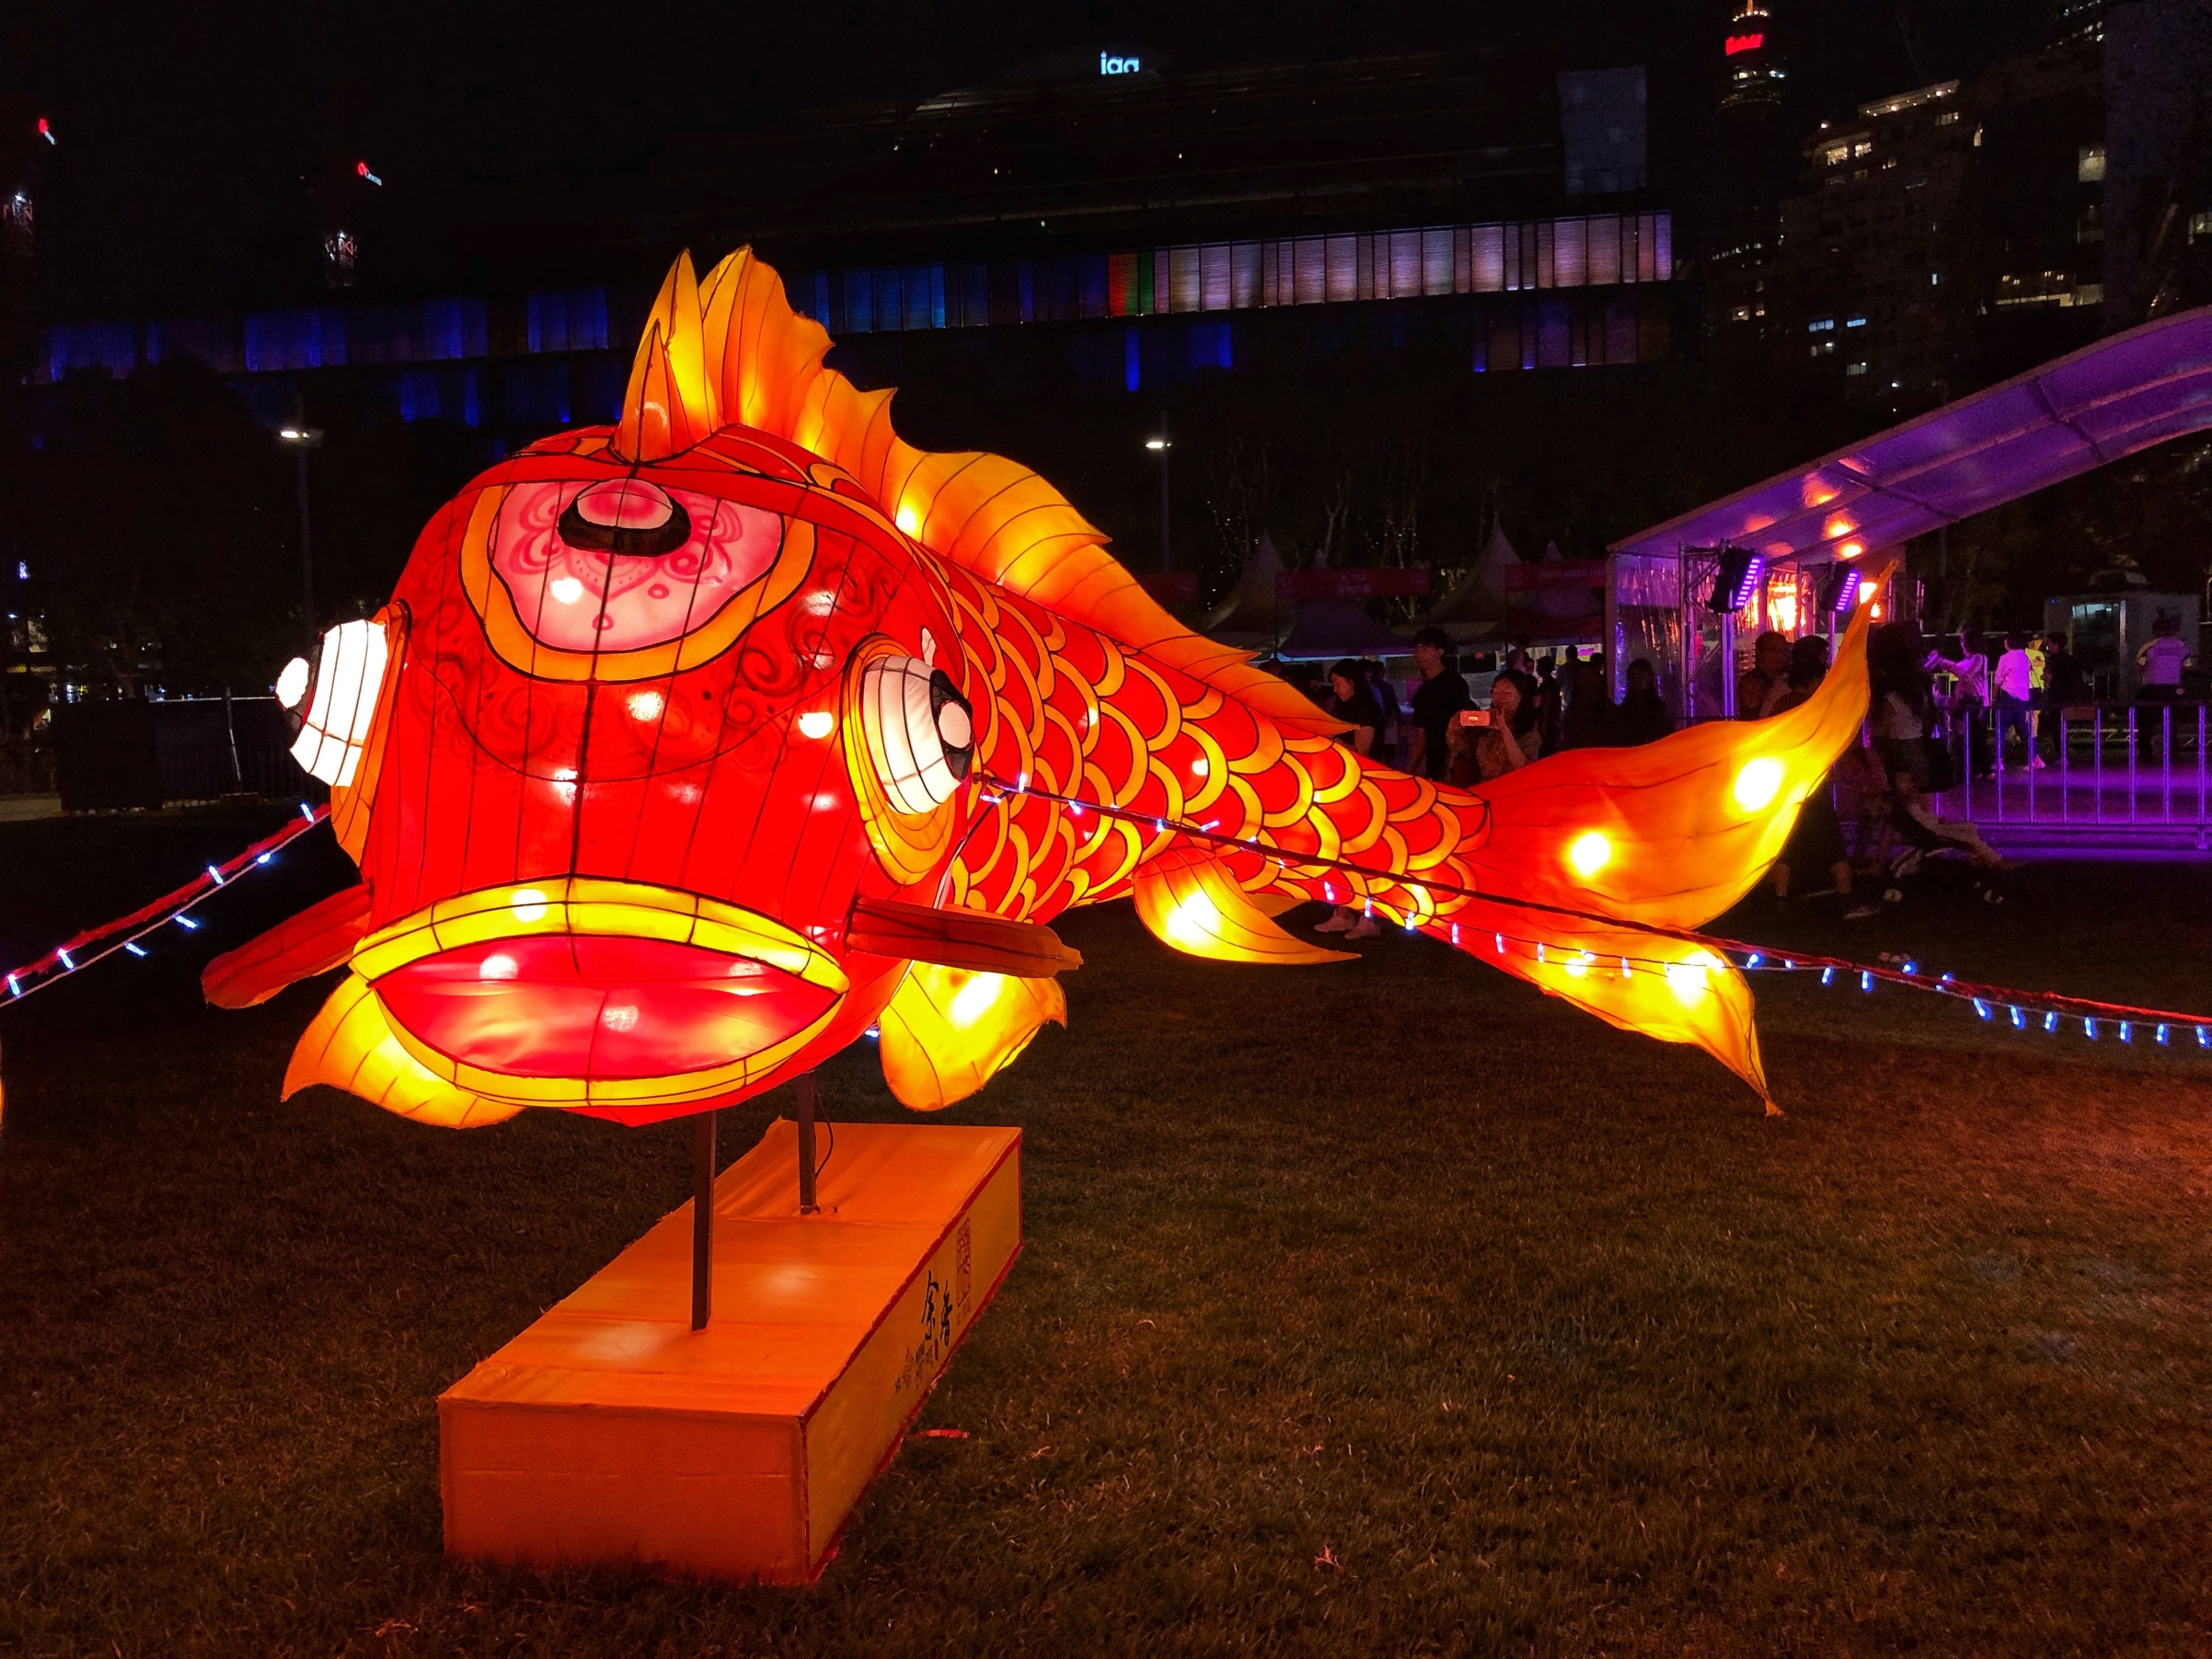 Chinese New Year Lantern Festival in Tumbalong Park